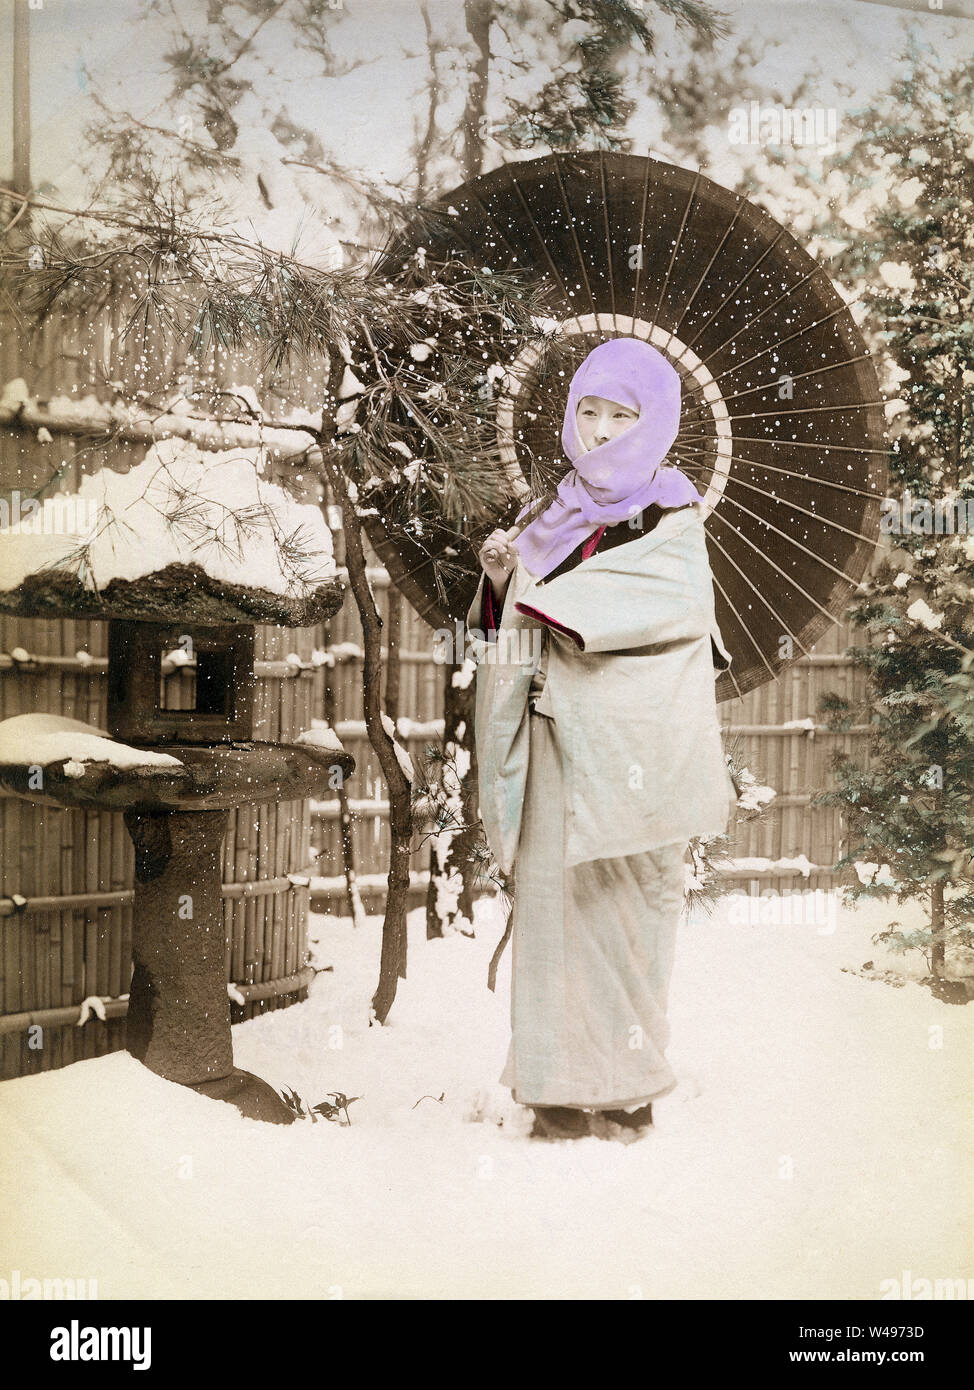 [ 1890s Japan - Japanese Woman with Parasol in the Snow ] —   A woman in a thick winter kimono has an okosozukin (御高祖頭巾) wrapped around her head to protect herself against the winter cold. She is holding a paper parasol.  19th century vintage albumen photograph. Stock Photo